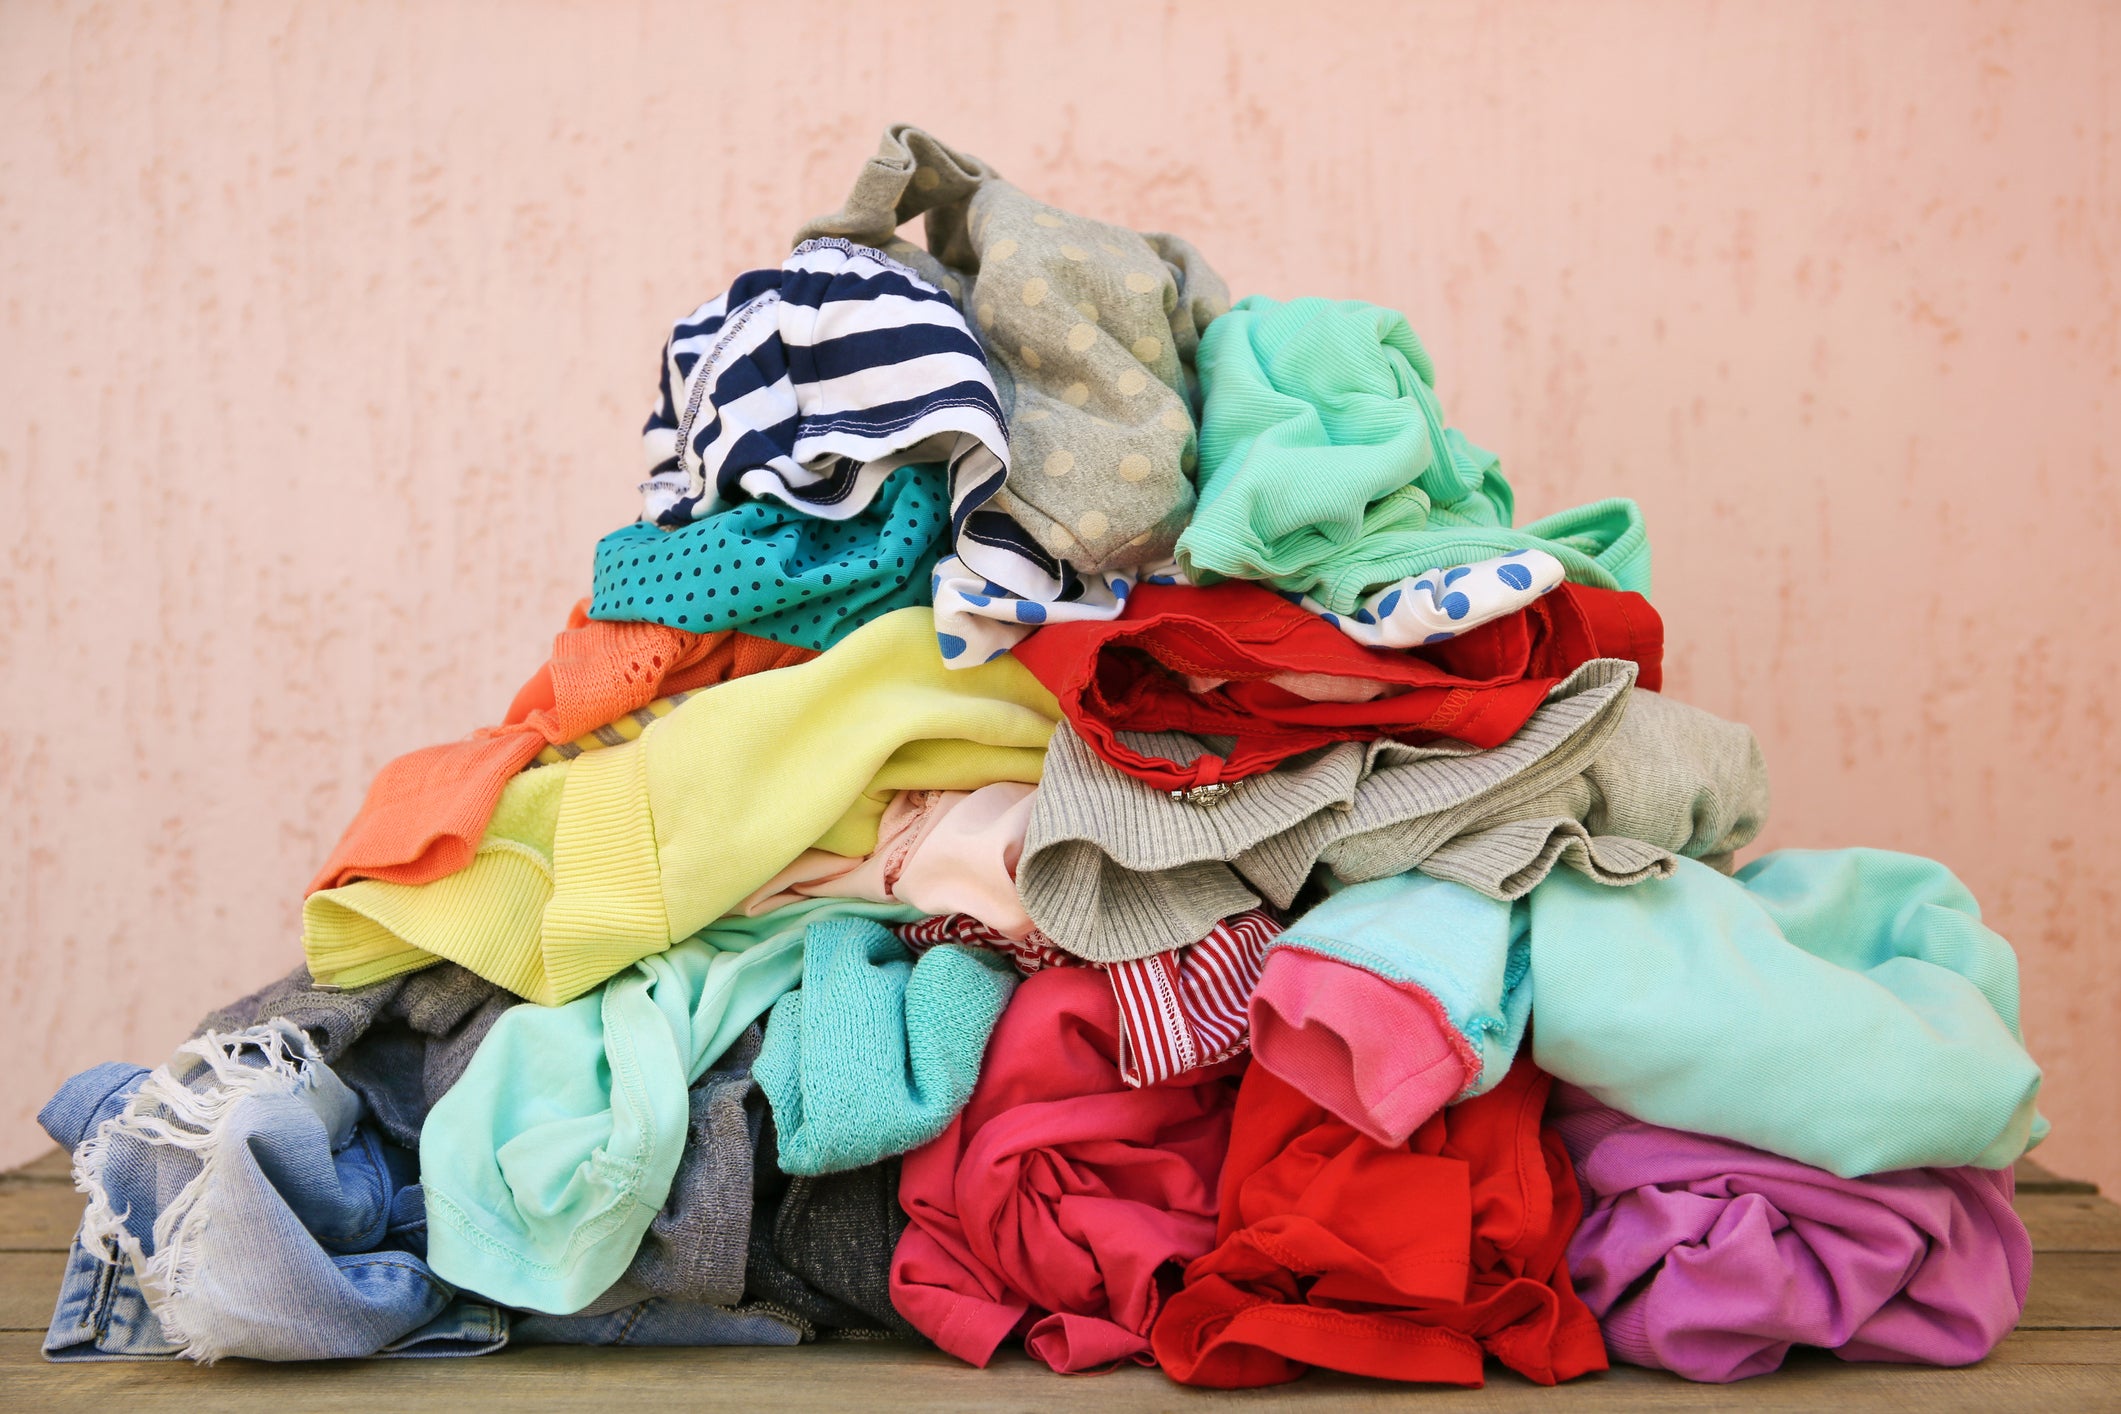 Did you know that synthetic fabrics such as Nylon and Polyester